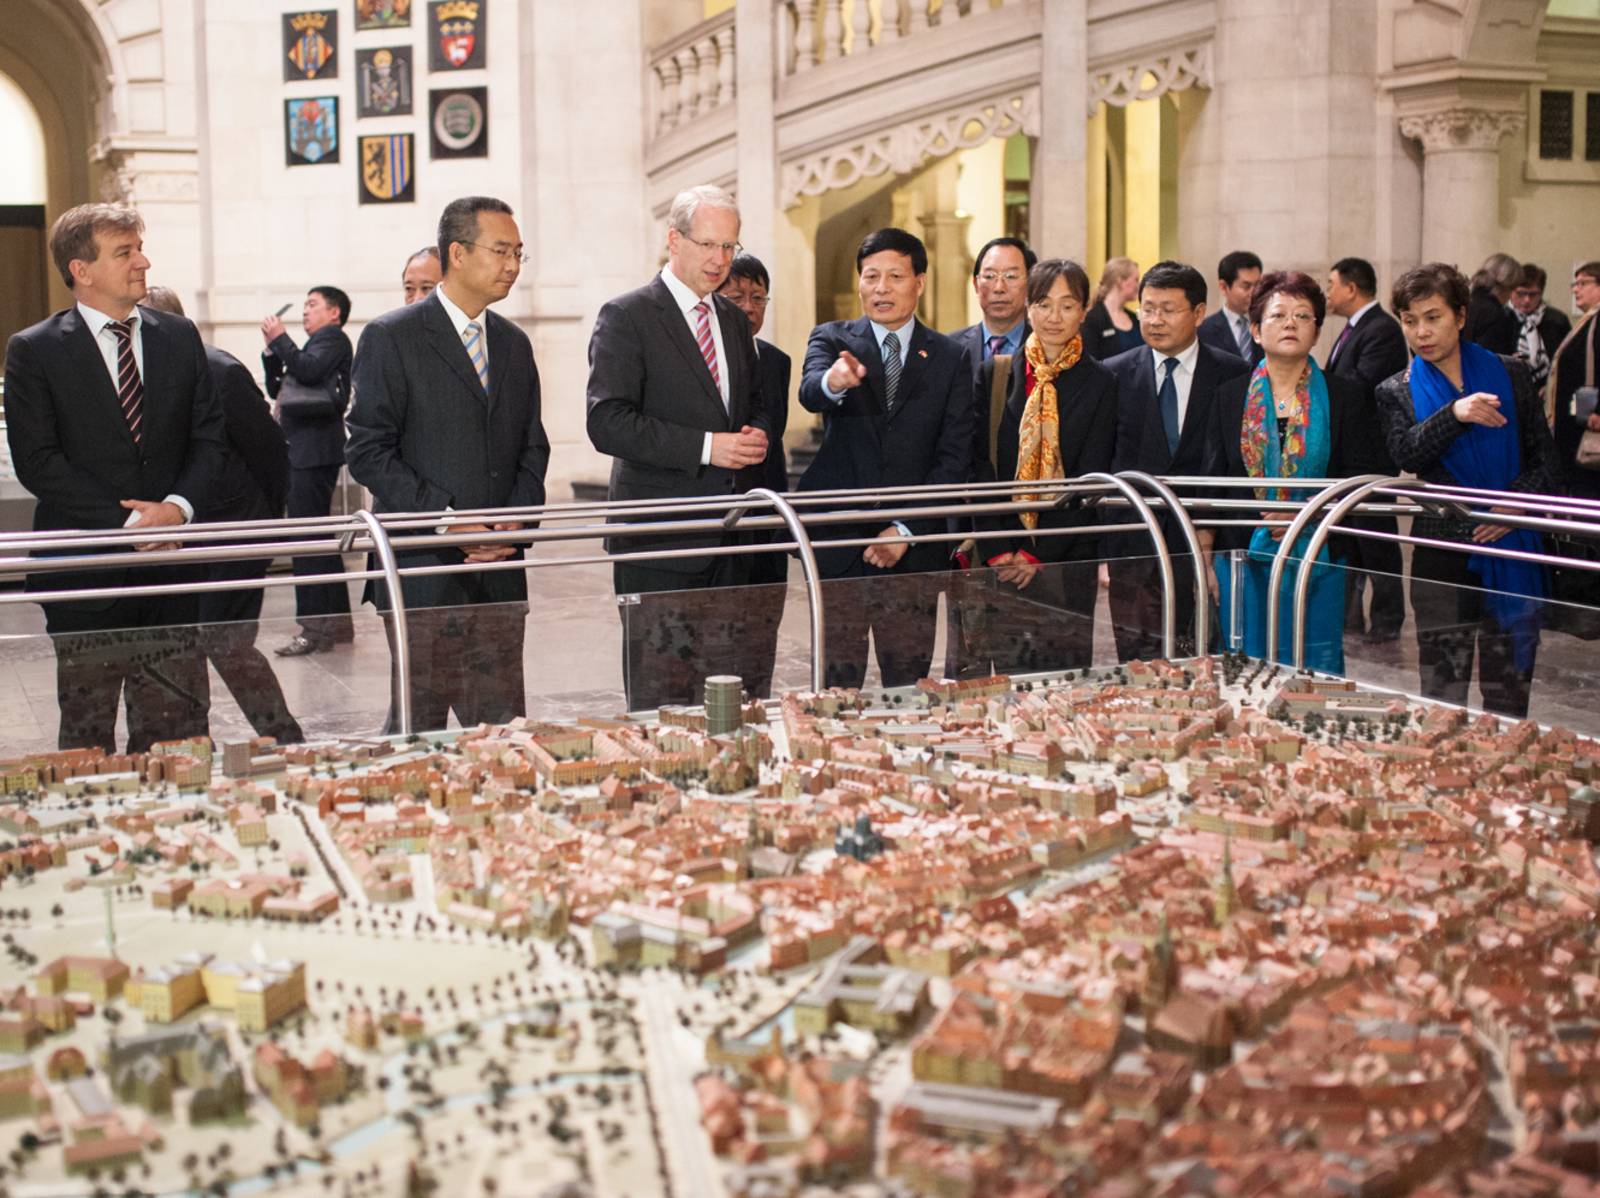 Together with the guests from Zhengzhou (Henan Province), Lord Mayor Schostok viewed the model of Hannover in the New Town Hall’s dome hall